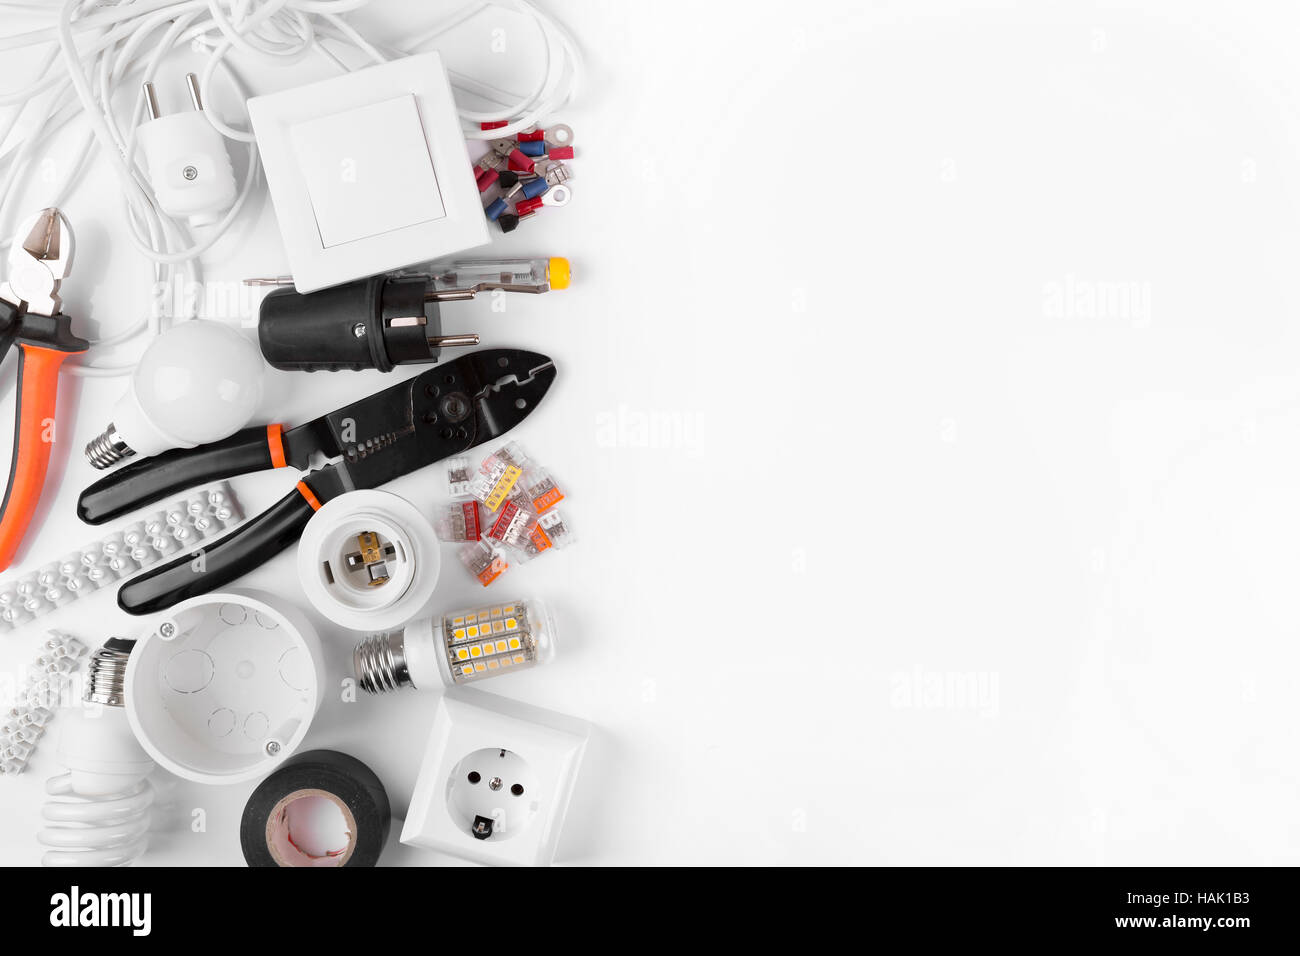 top view of electrical tools and equipment on white Stock Photo